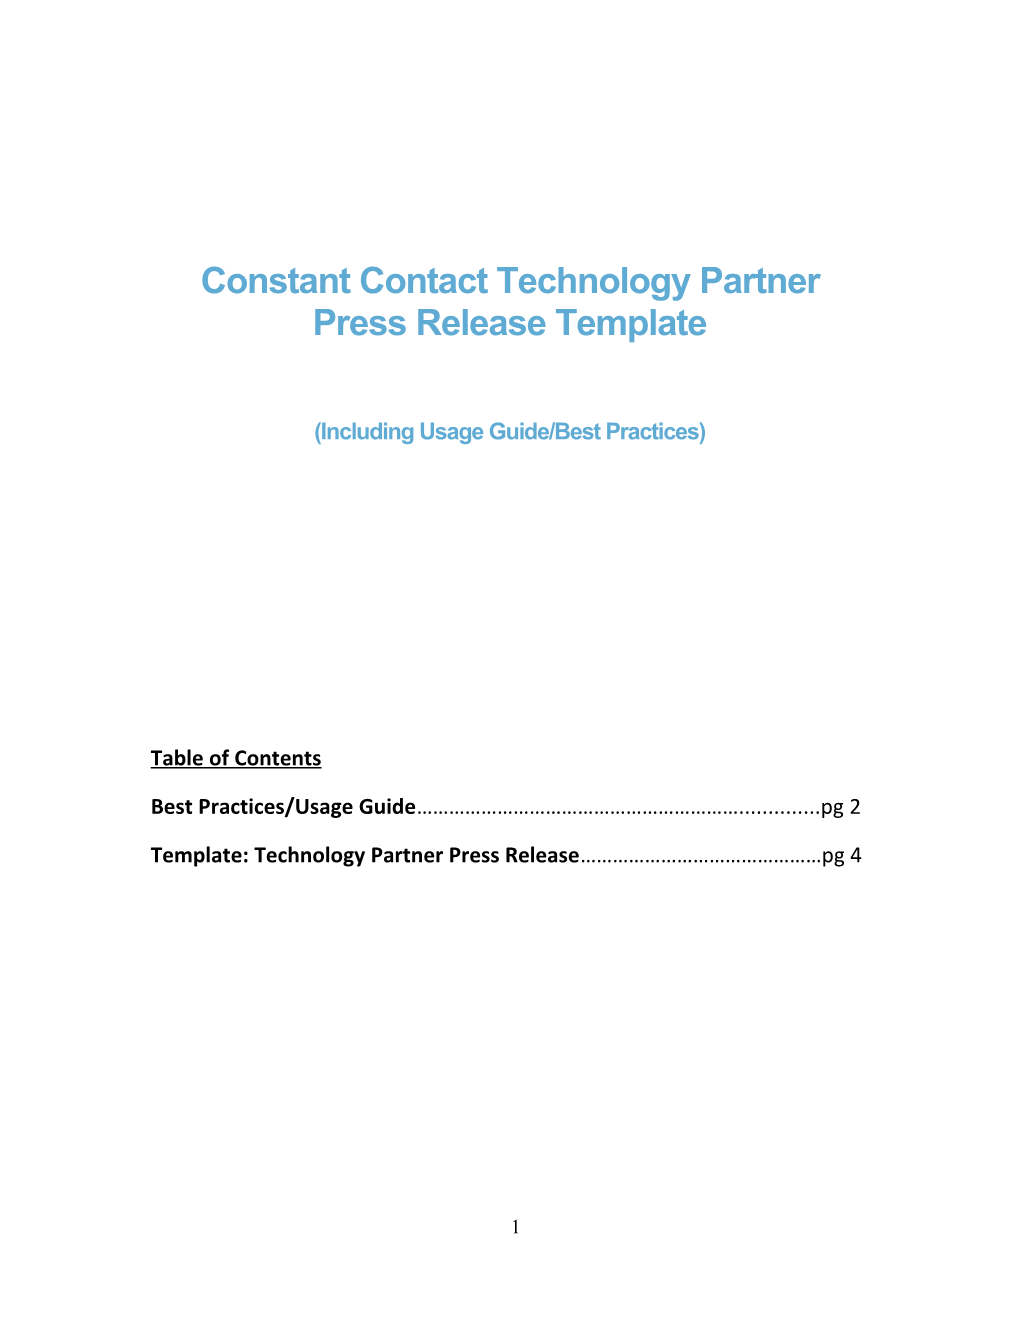 Constant Contact Technology Partner Press Release Template